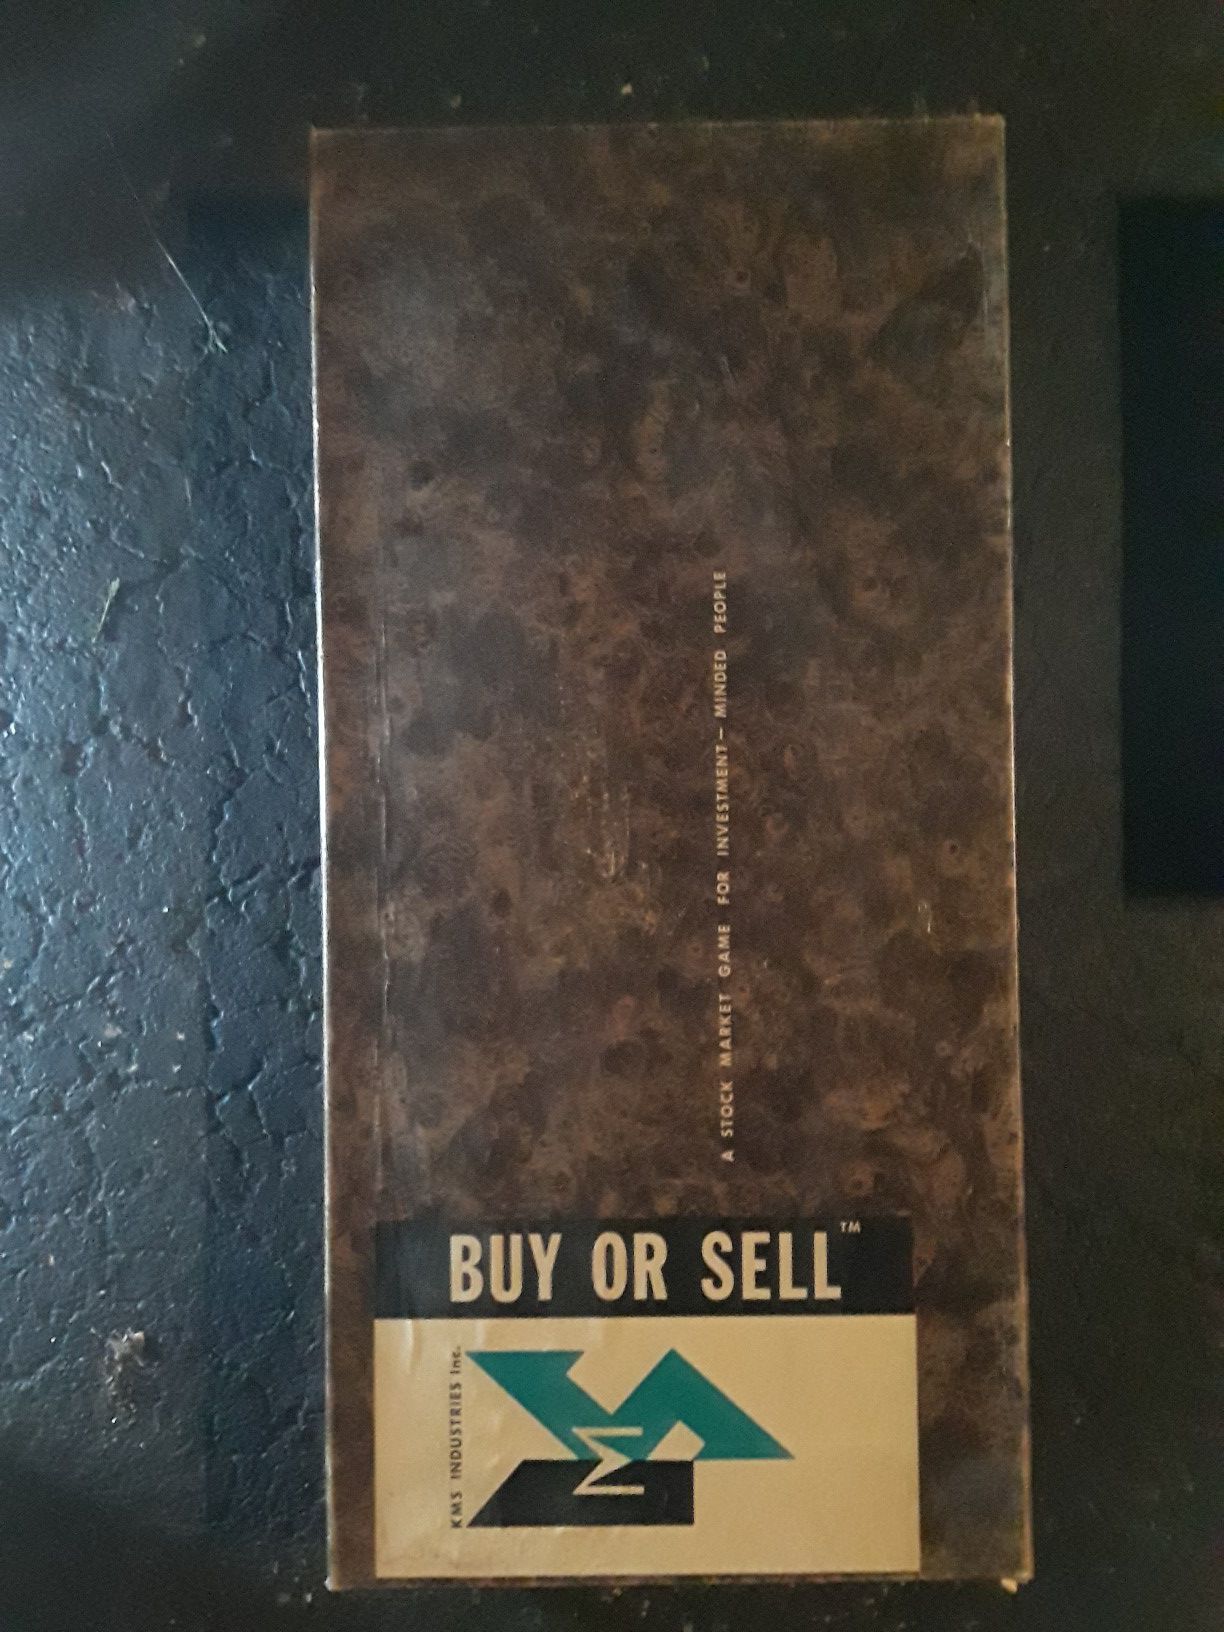 Buy or sell the board game